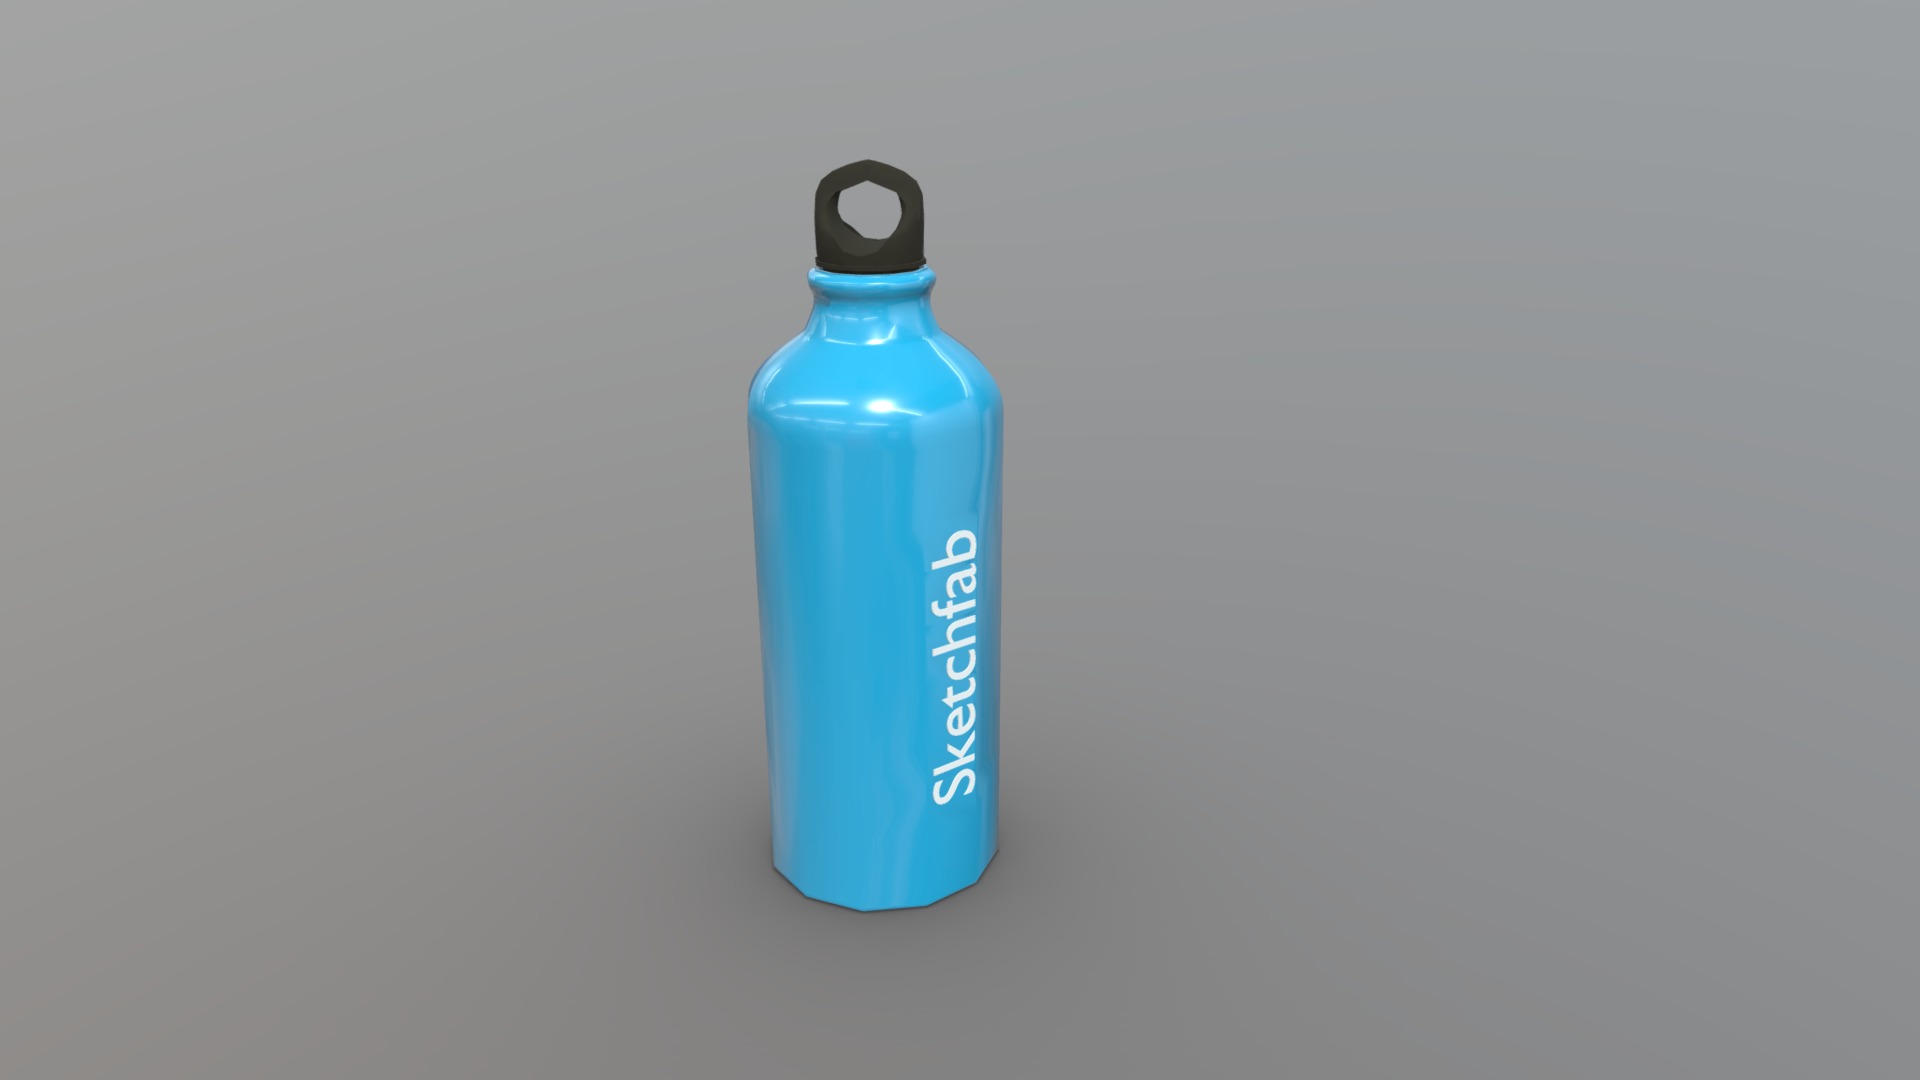 Trying to get some blender skills but it's not easy. I still have a lot to learn!
Anyway, it would be cool to have such a bottle for real though 3d model